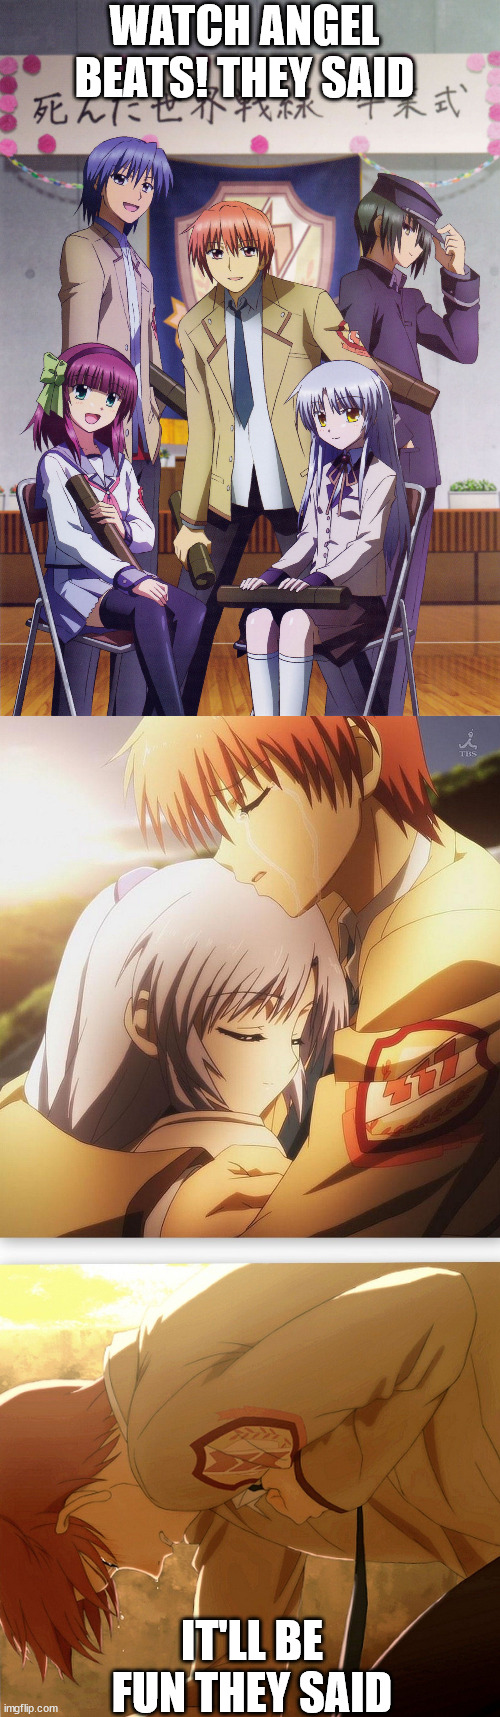 Heaven is a sad place | WATCH ANGEL BEATS! THEY SAID; IT'LL BE FUN THEY SAID | image tagged in anime,sad,it will be fun they said | made w/ Imgflip meme maker